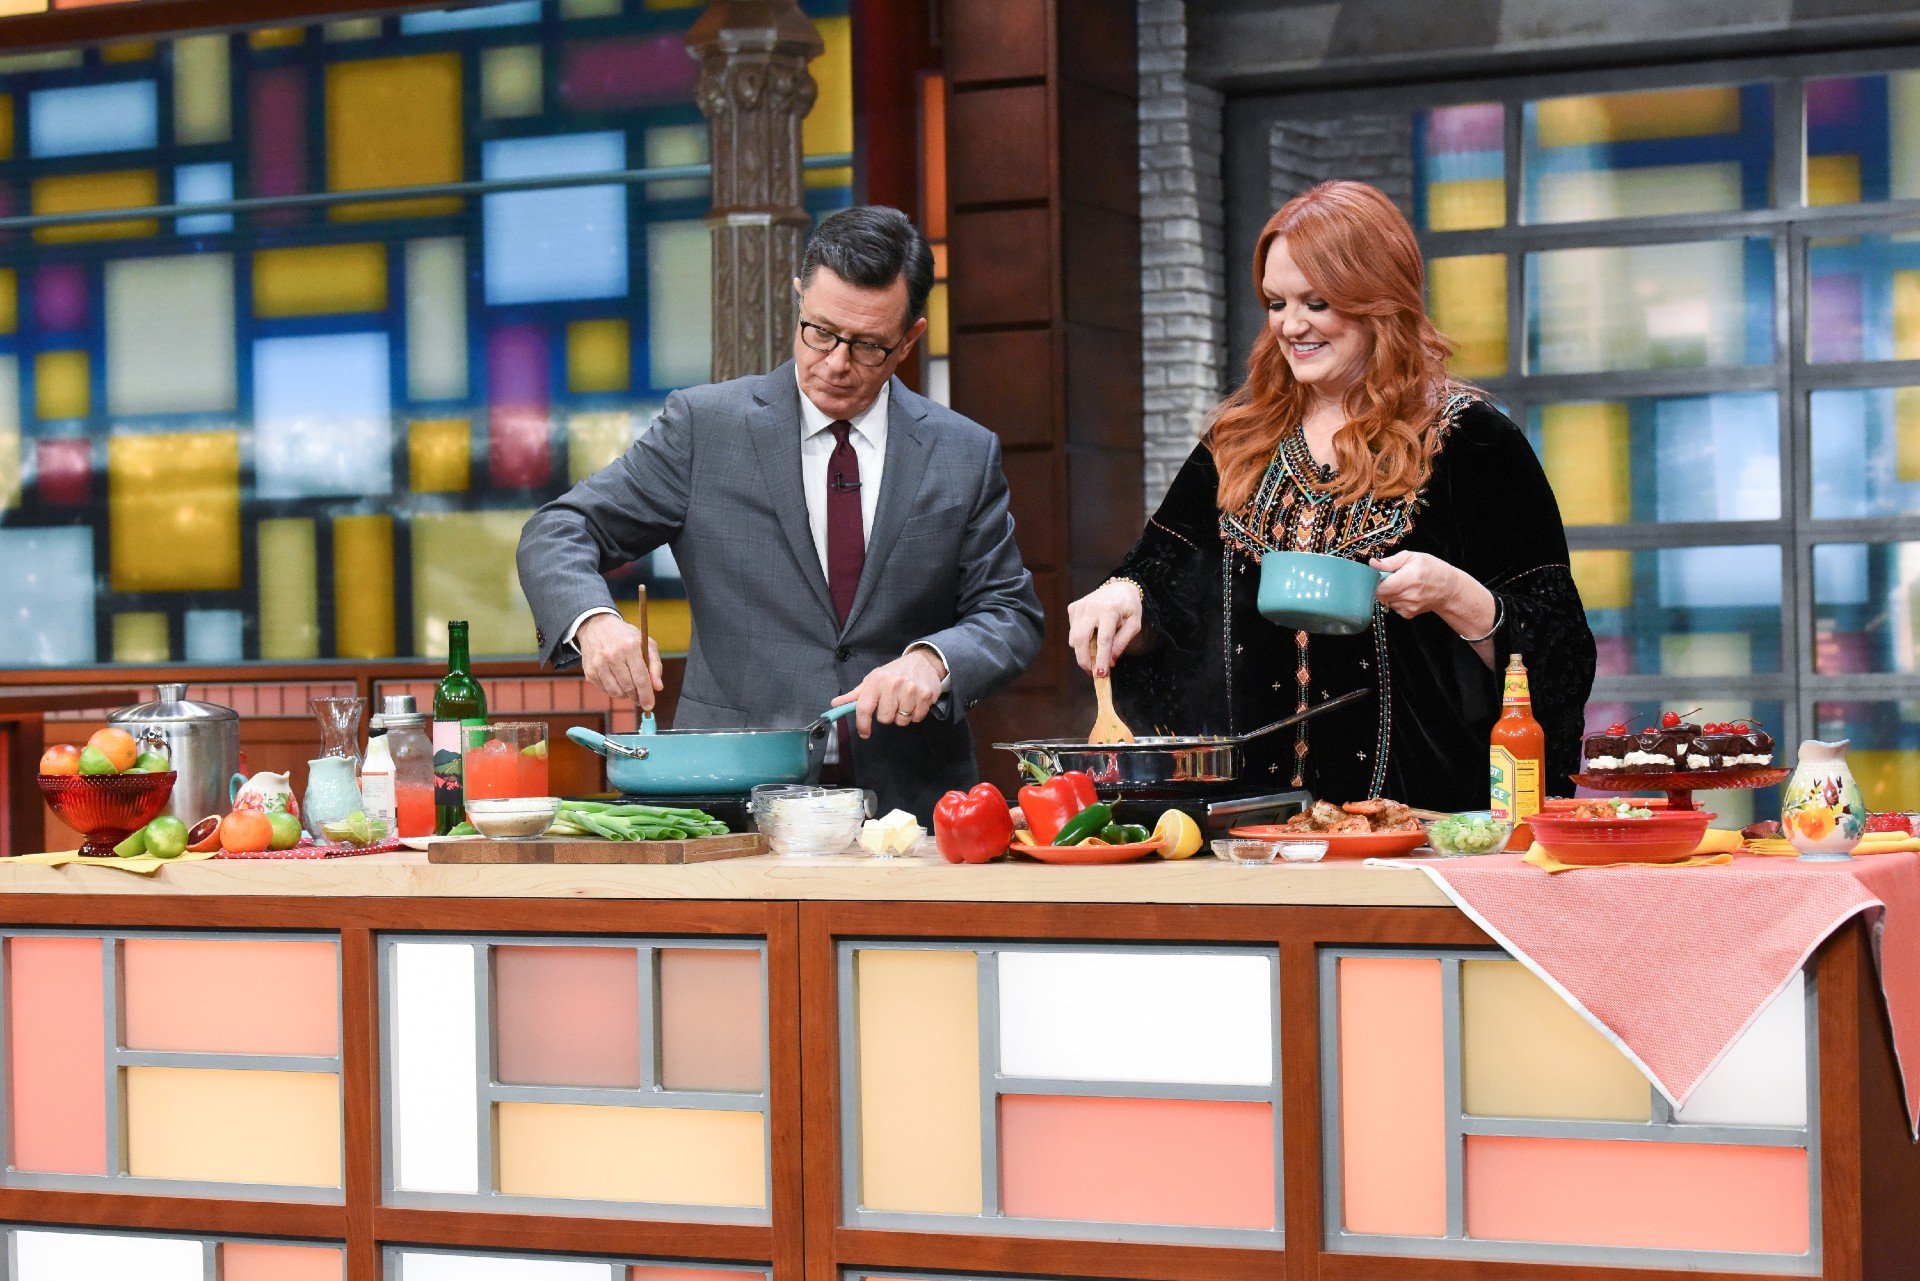 Stephen Colbert and Ree Drummond do a cooking demonstration on his late night show.